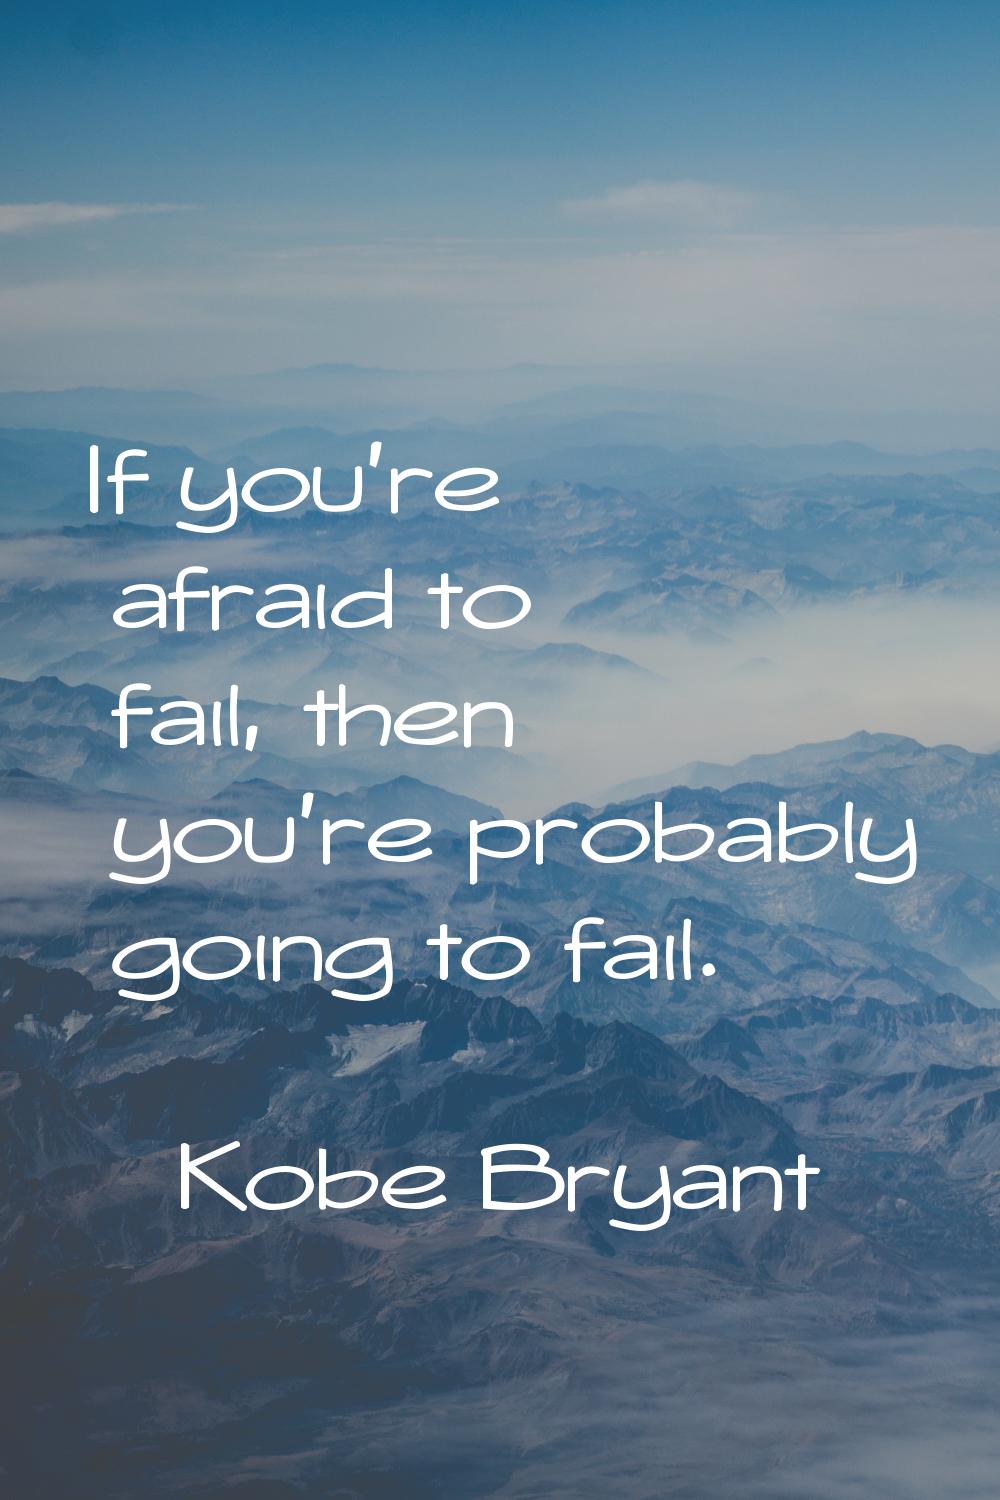 If you're afraid to fail, then you're probably going to fail.